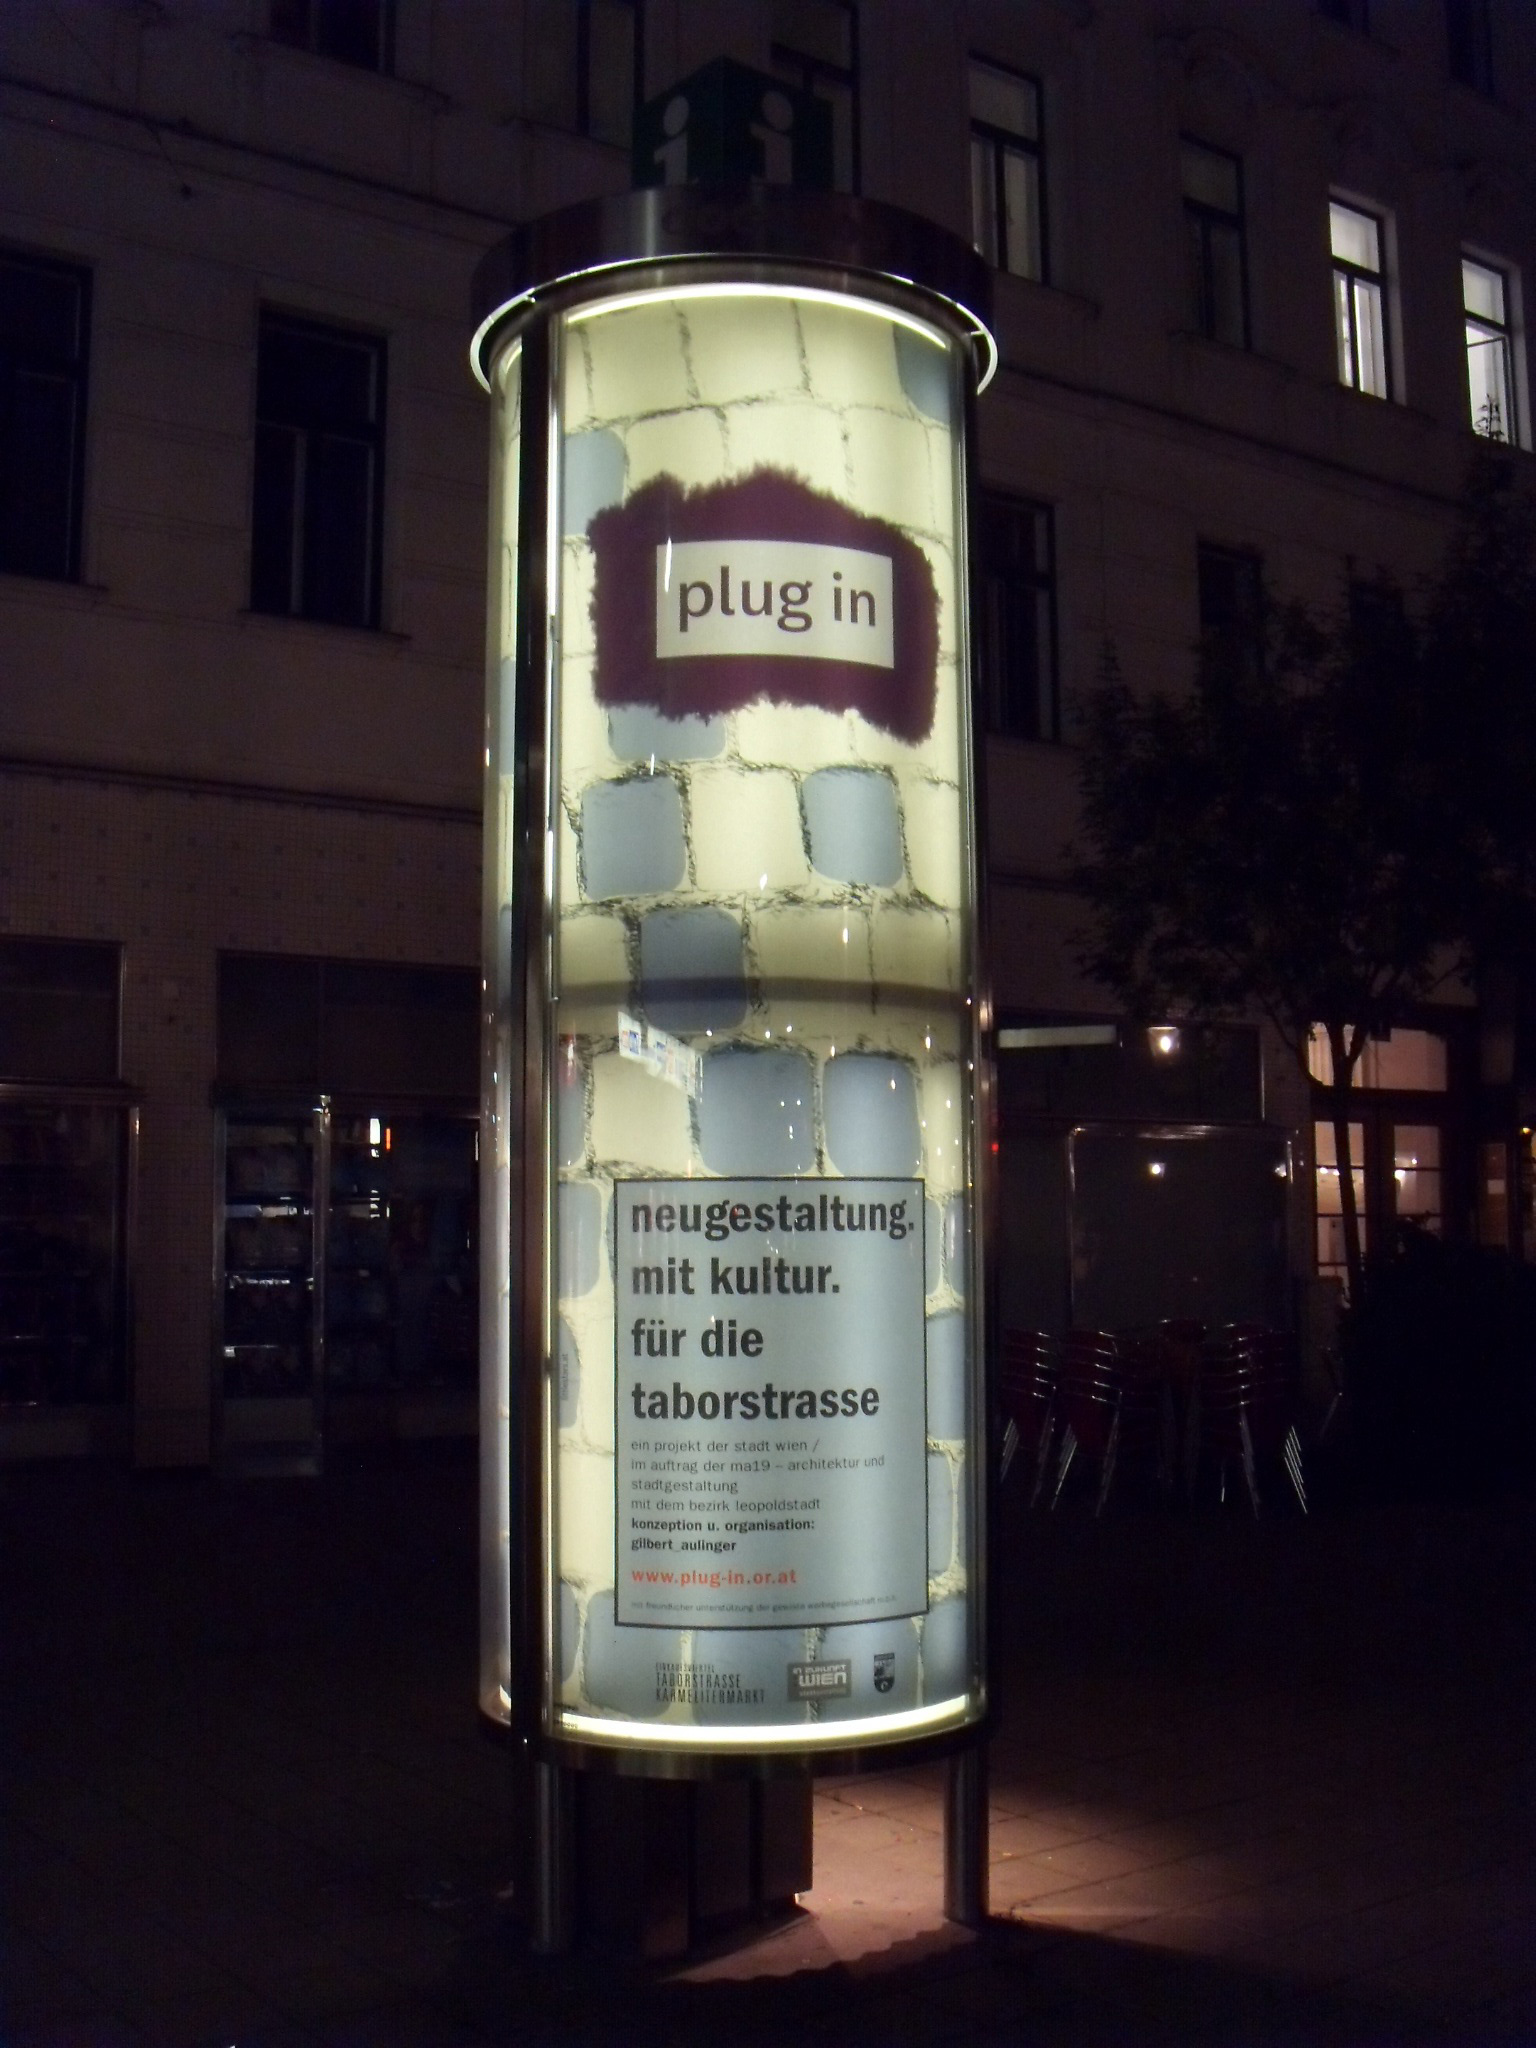 Night. One side of large glass advertising pillar in the city. Poster illuminated inside. Illustrated cobblestone floor allover. Upper half logo and lower half textbox overlayed.